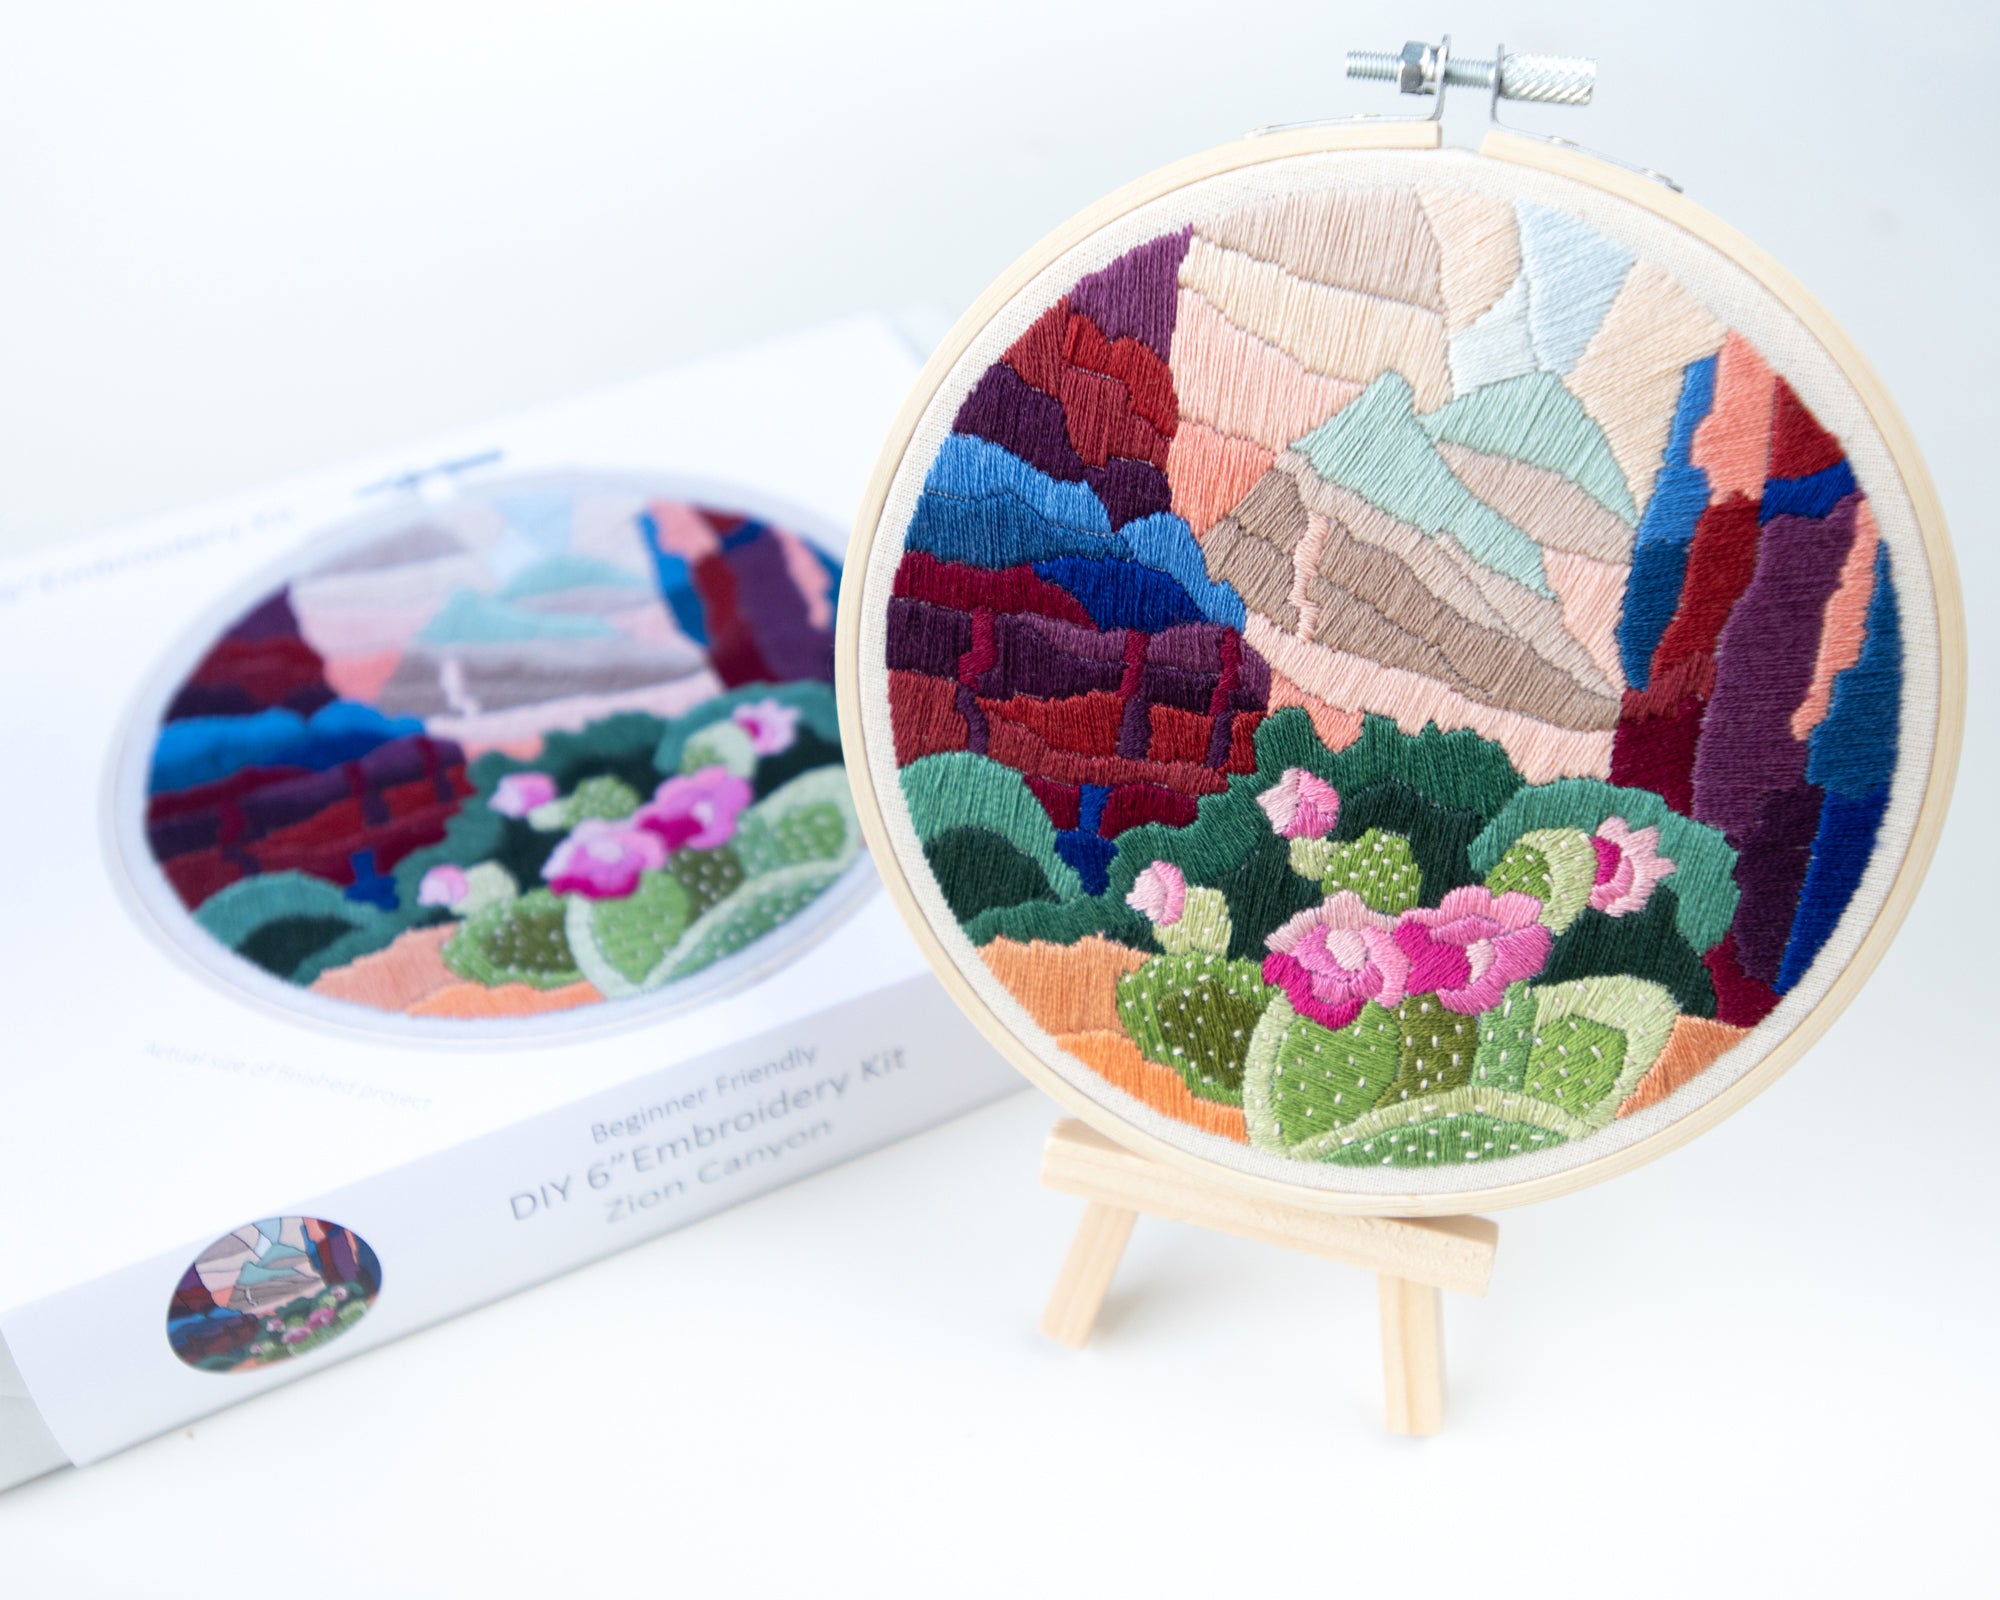 Zion Canyon DIY Embroidery Kit